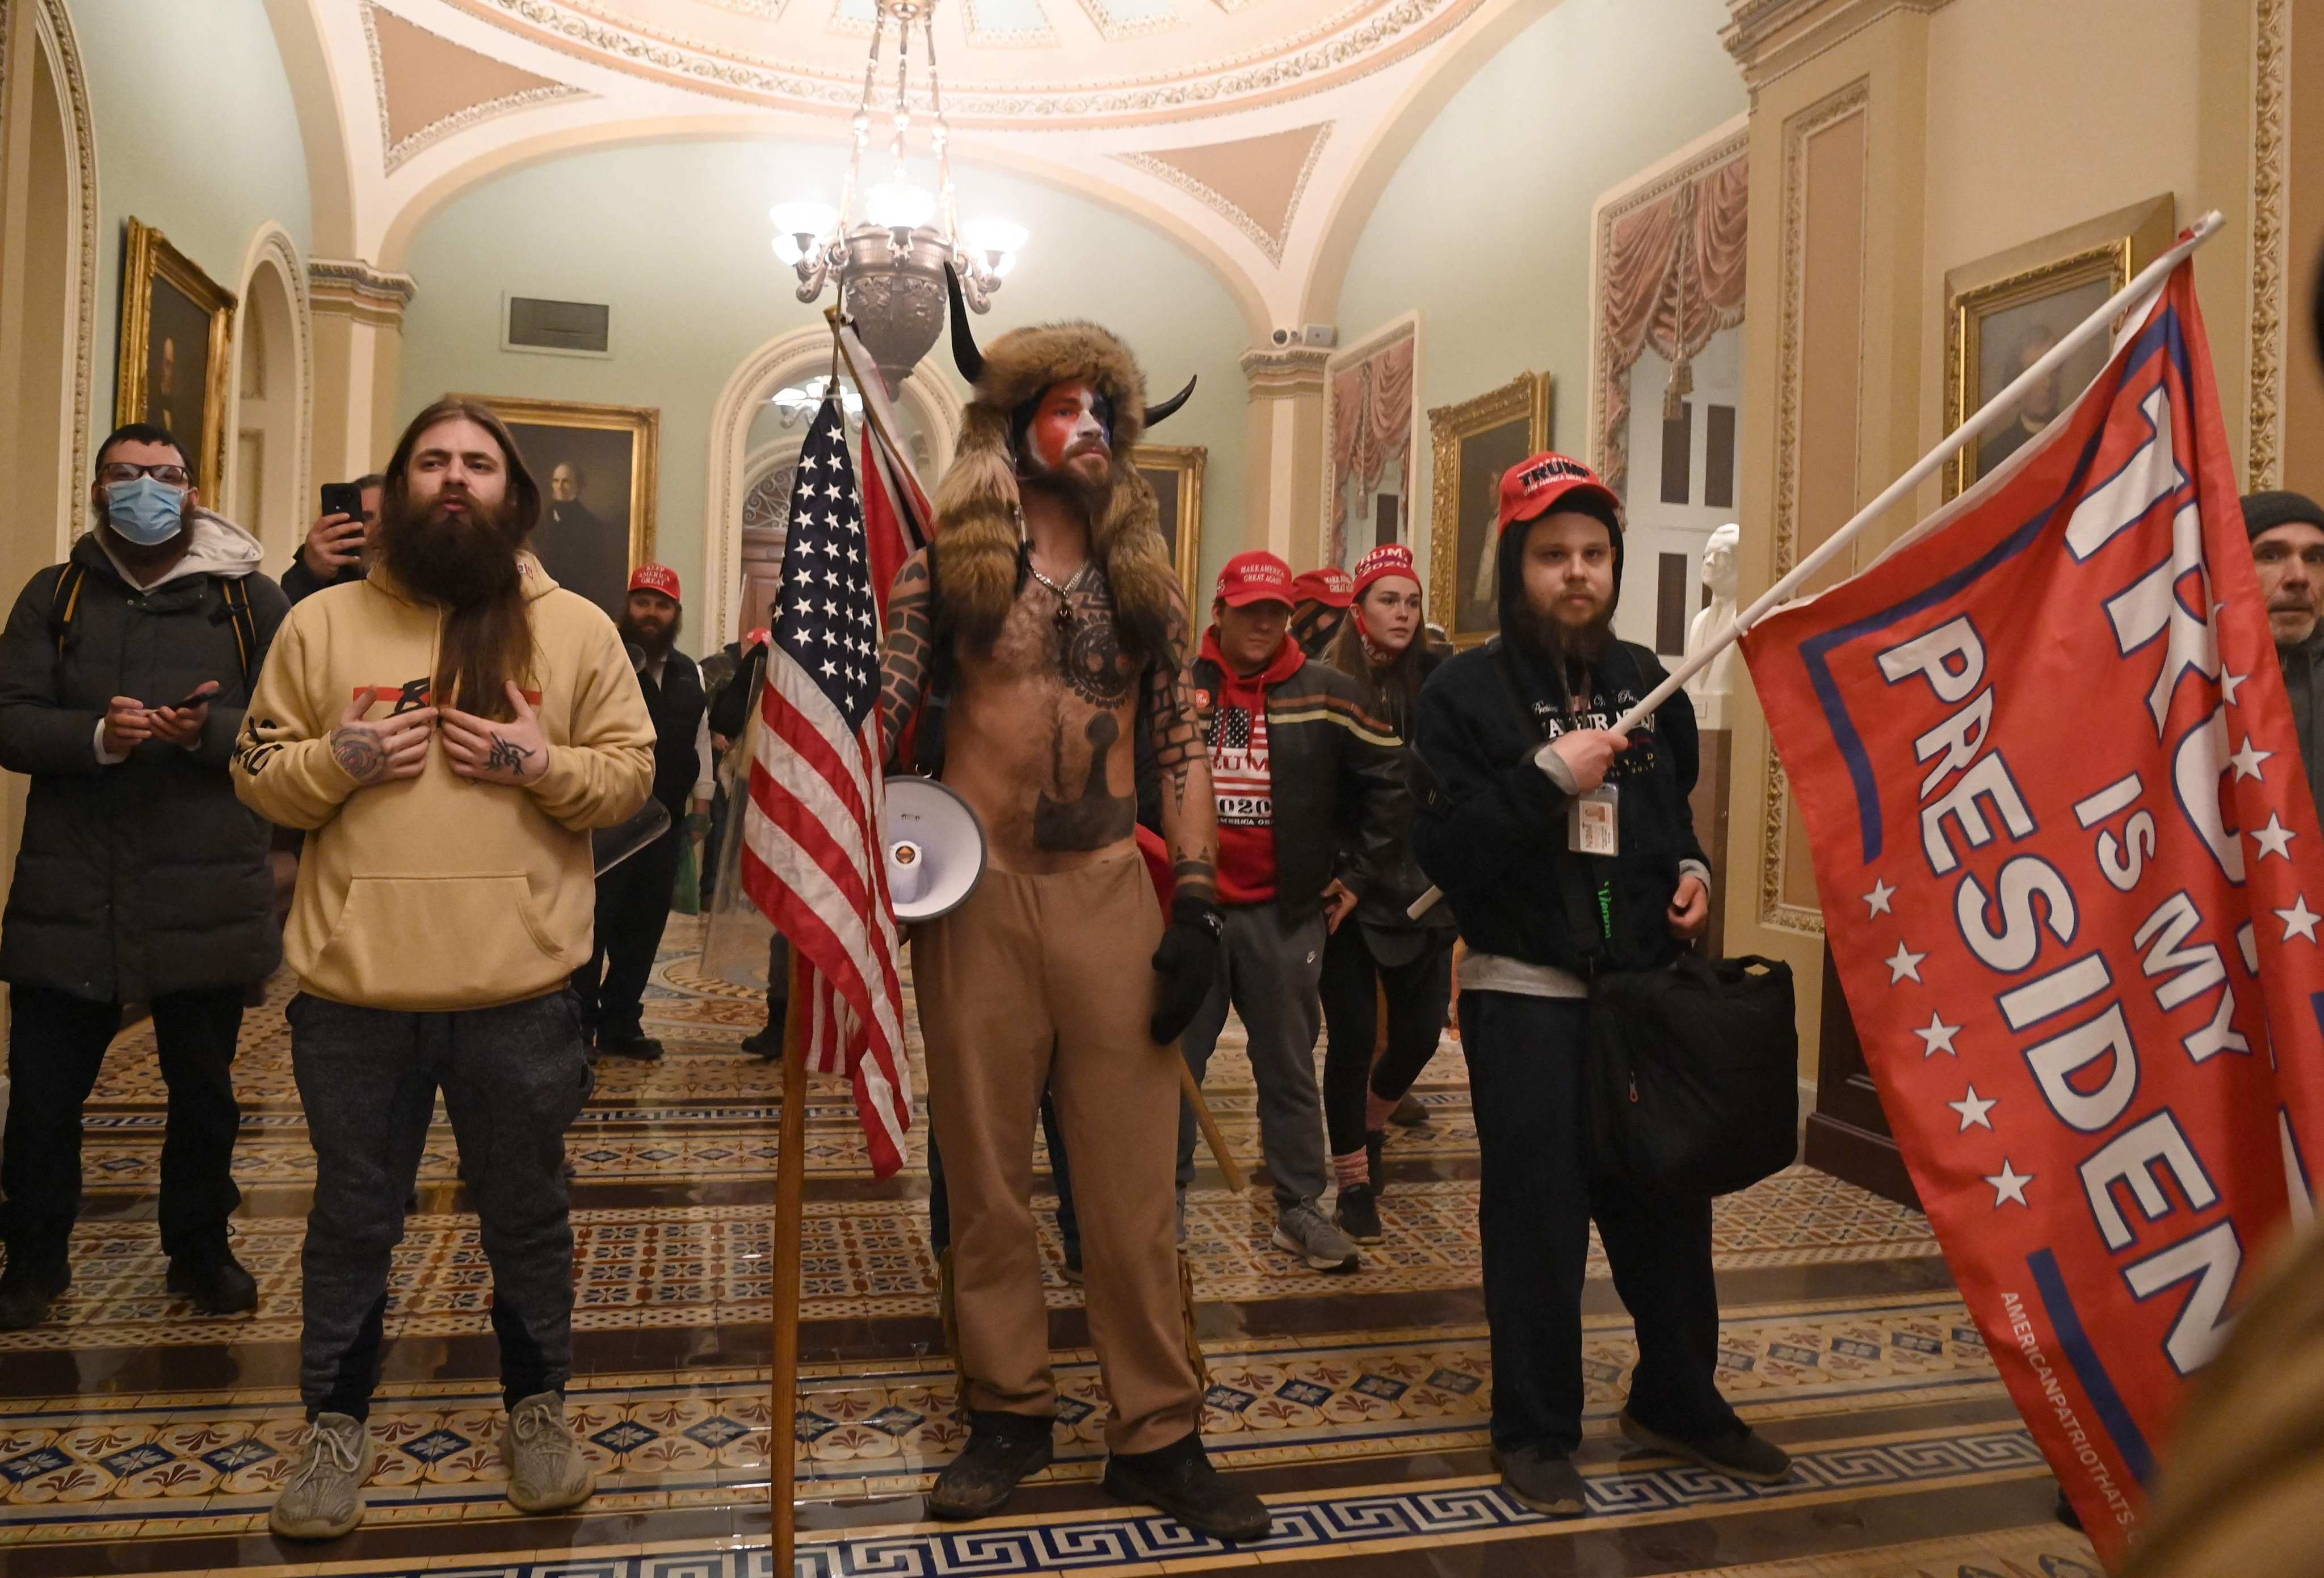 Supporters of former US president Donald Trump enter the US Capitol in Washington on January 6, 2021. Photo: AFP